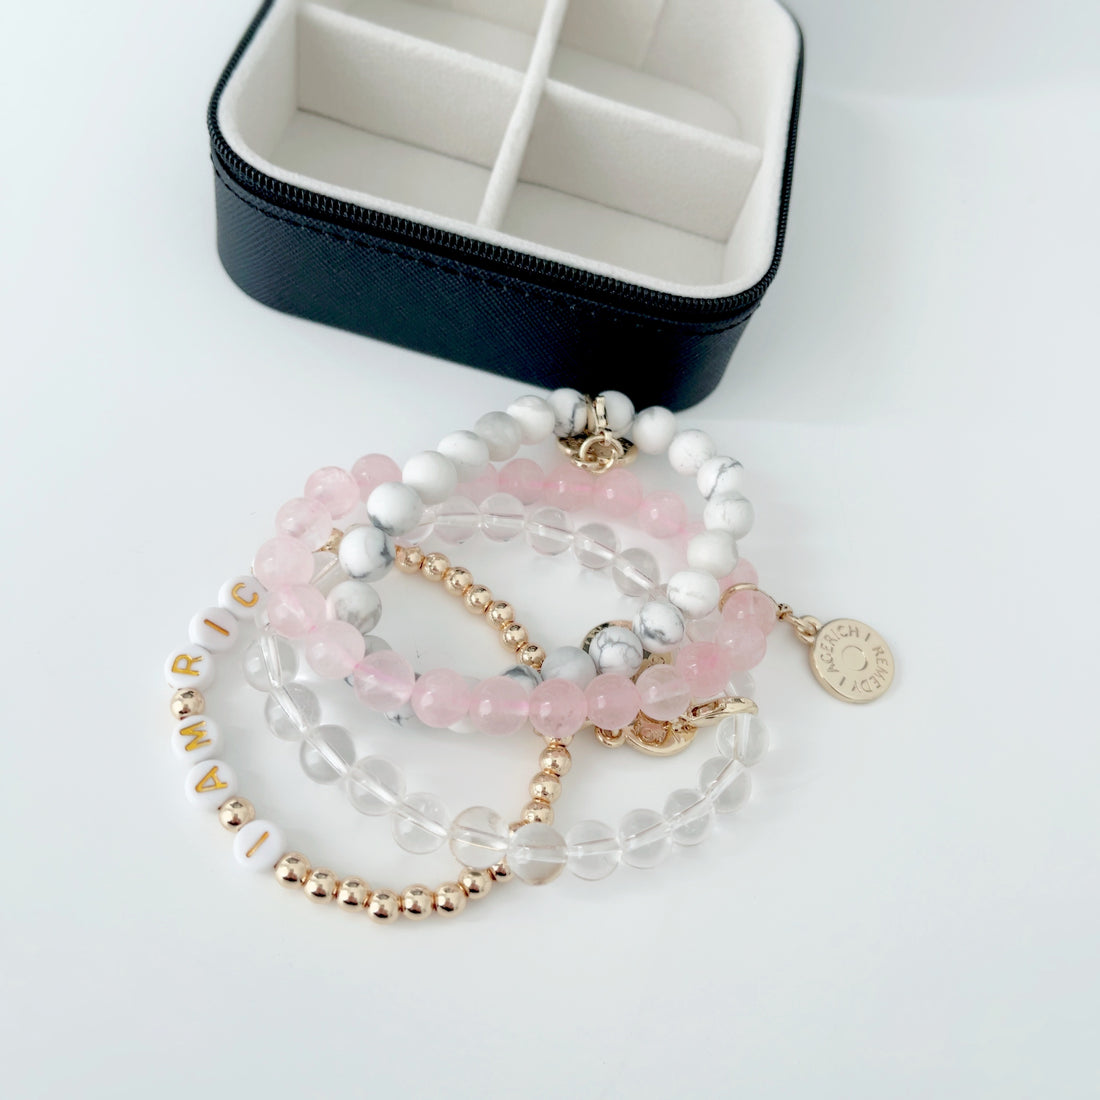 Bracelets: Add some sparkle to your wrist with Agerich&